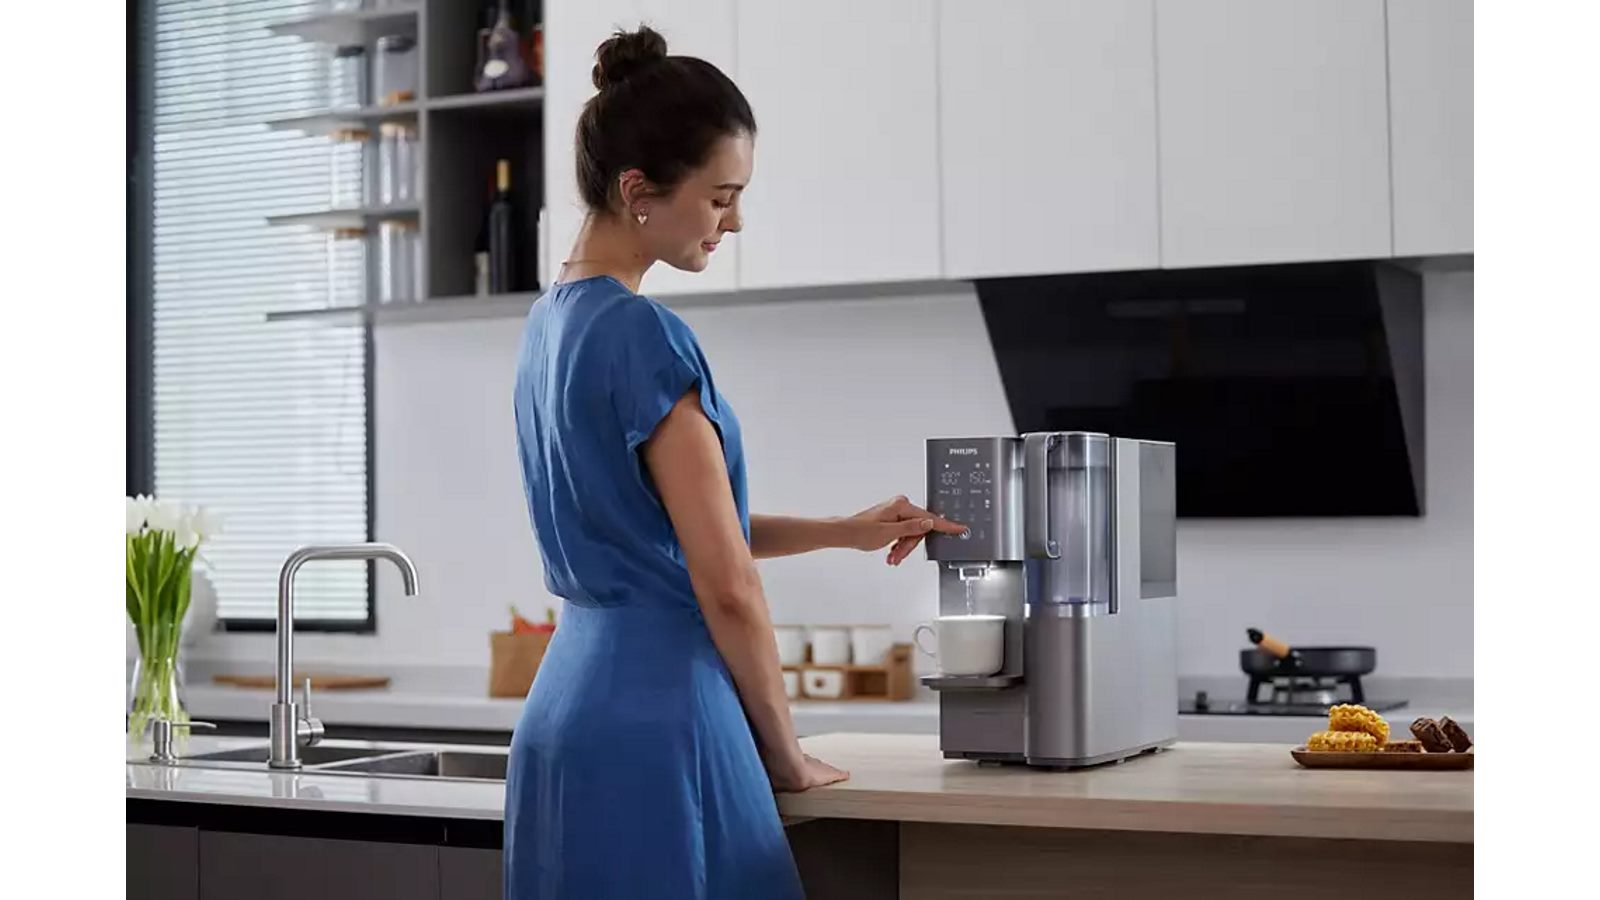 Introducing Philips Reverse Osmosis Water Station, Hot & Cold! Enjoy pure  tasting water!, Philips Water Solutions posted on the topic